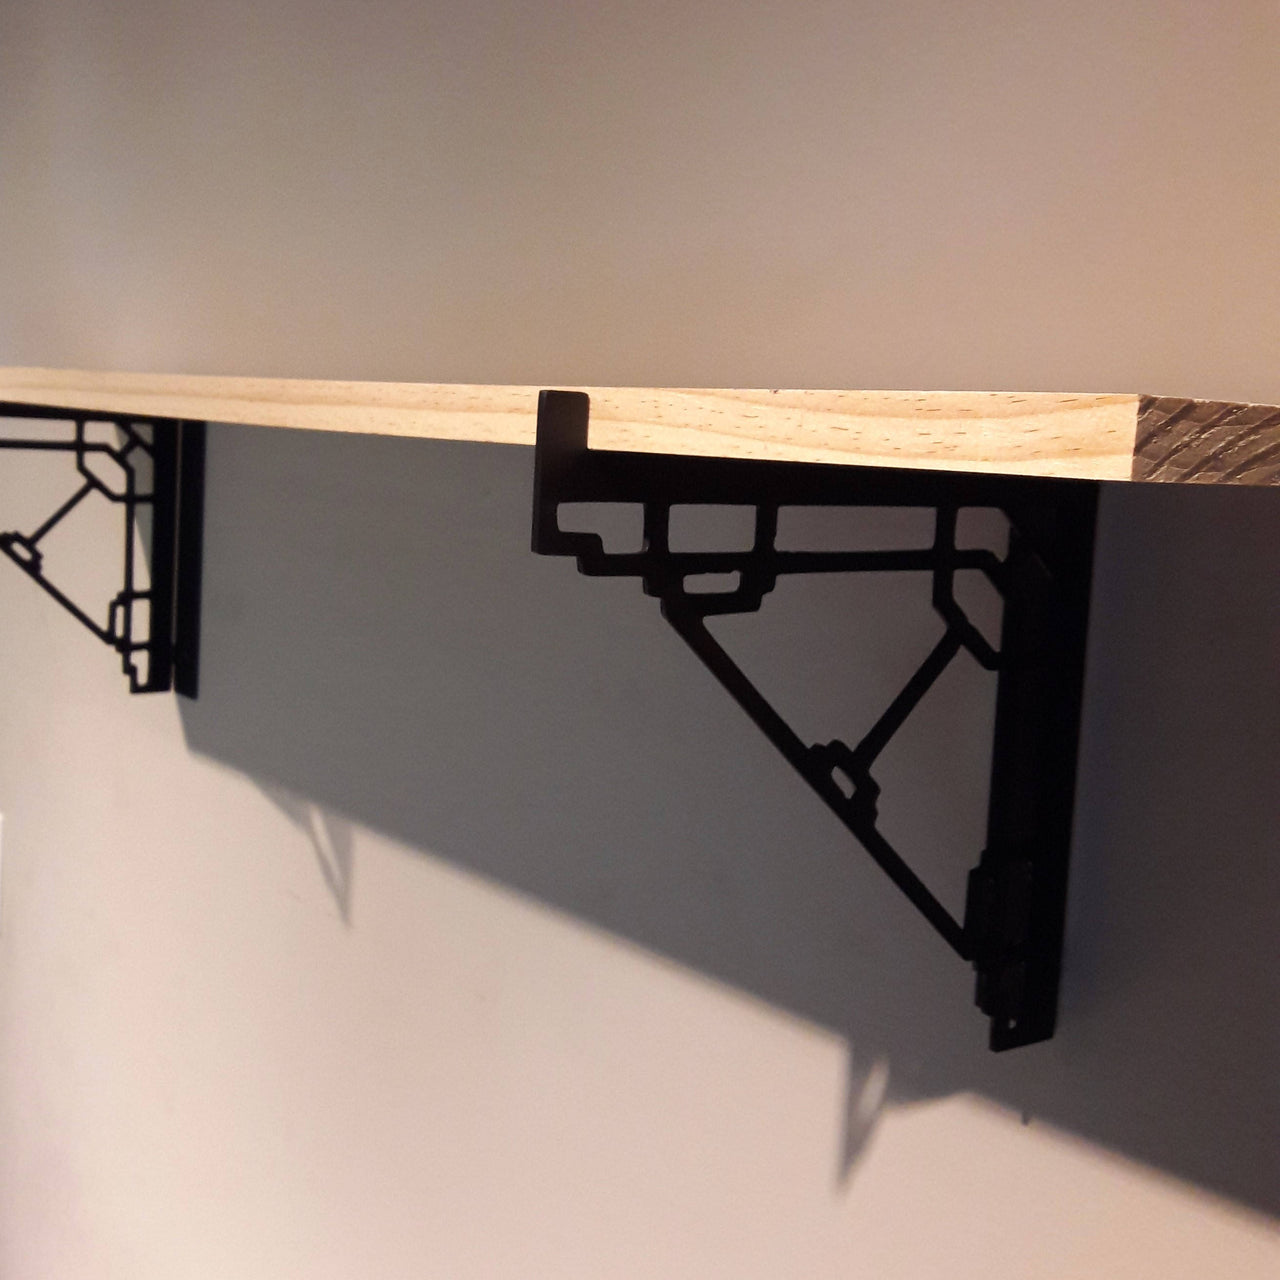 These metal shelf brackets are a contemporary design and fit standard lumber sizes